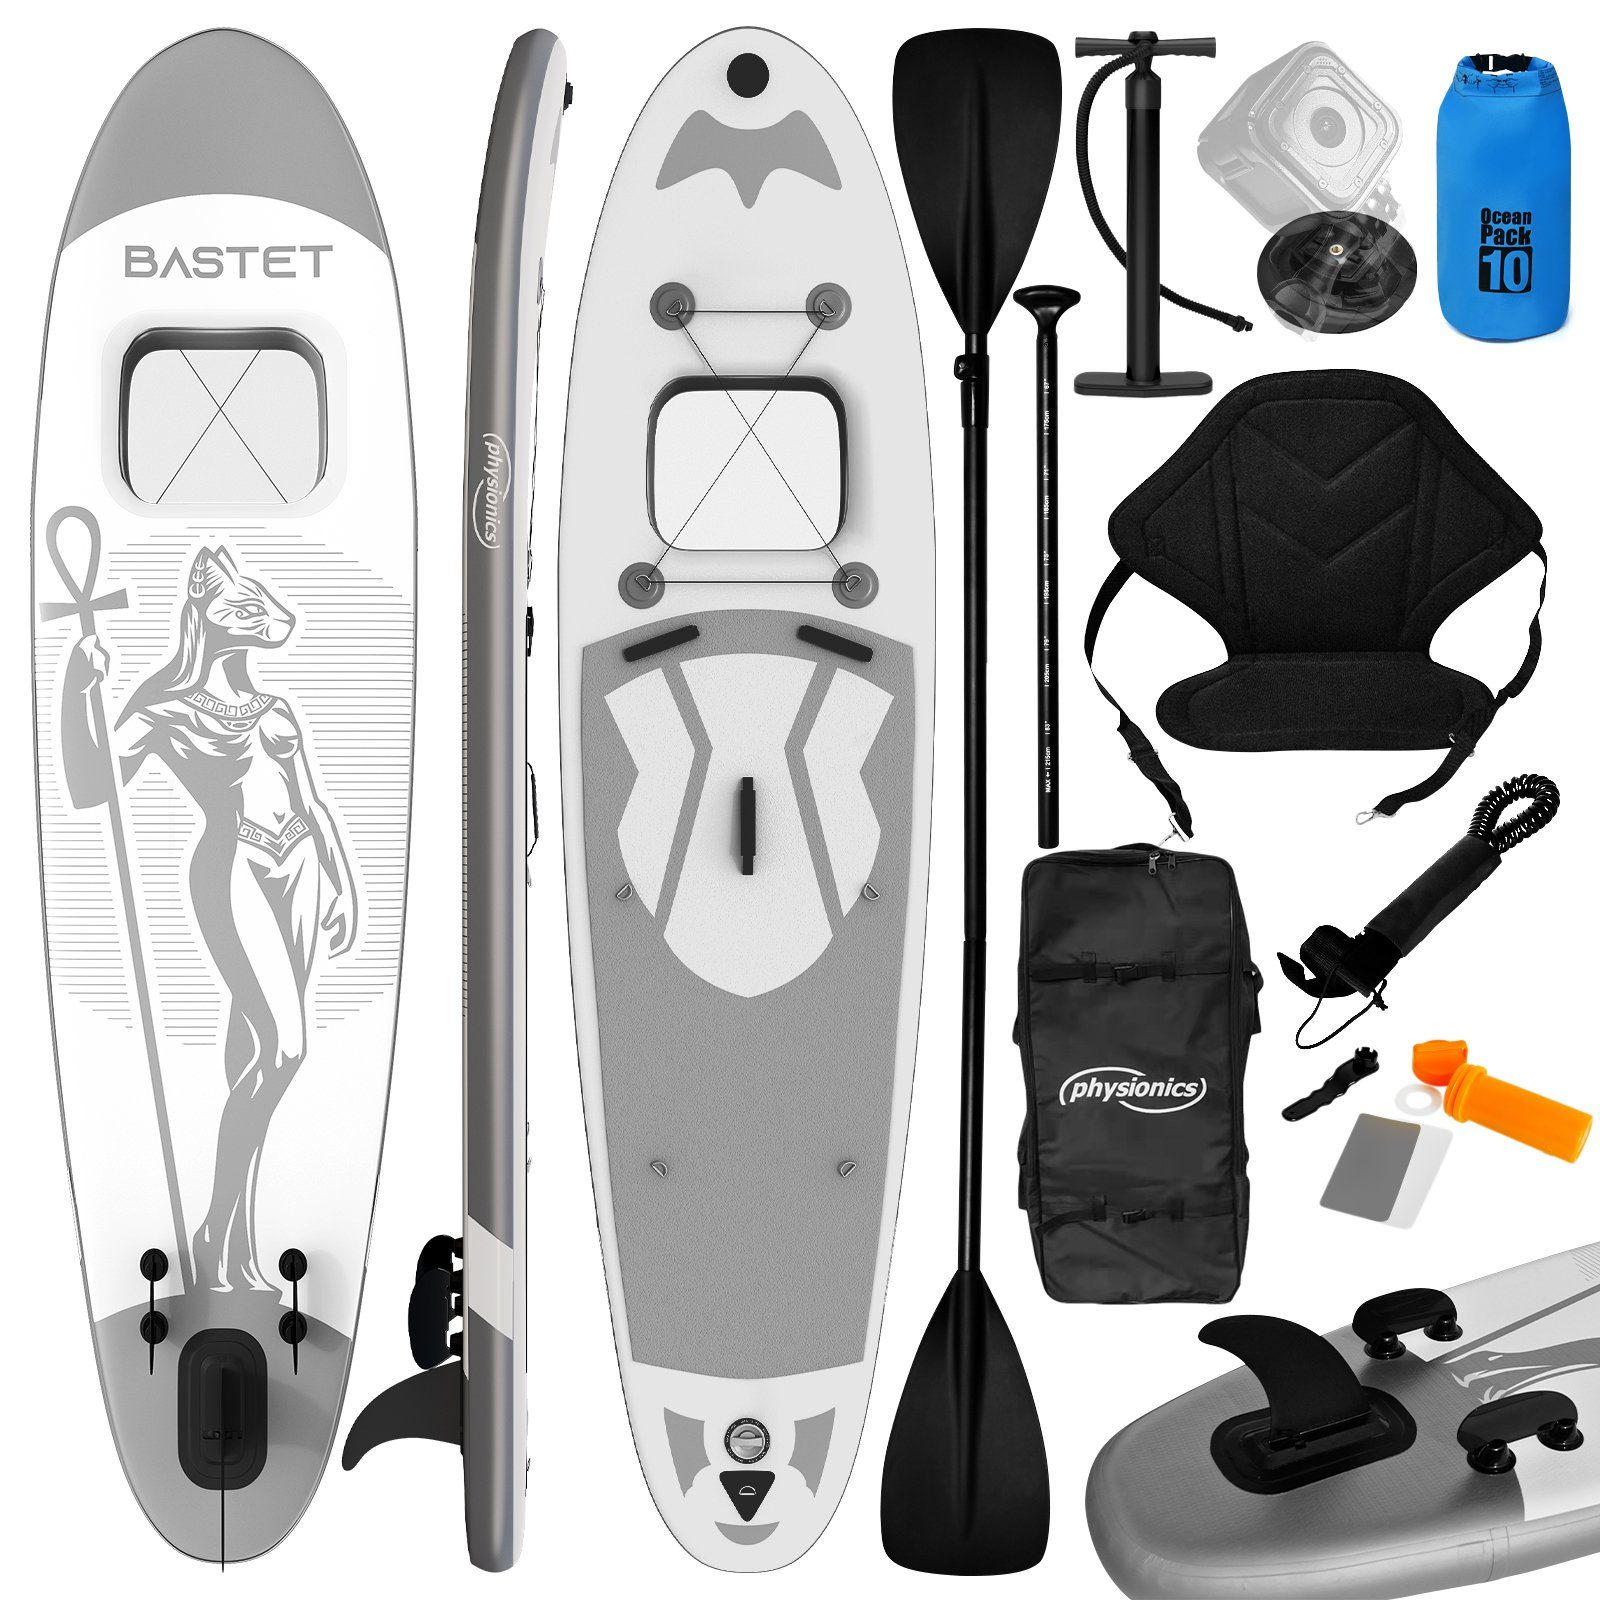 Physionics SUP-Board Stand Up Paddle Board Aufblasbares SUP Board 305cm Bastet(Silber)